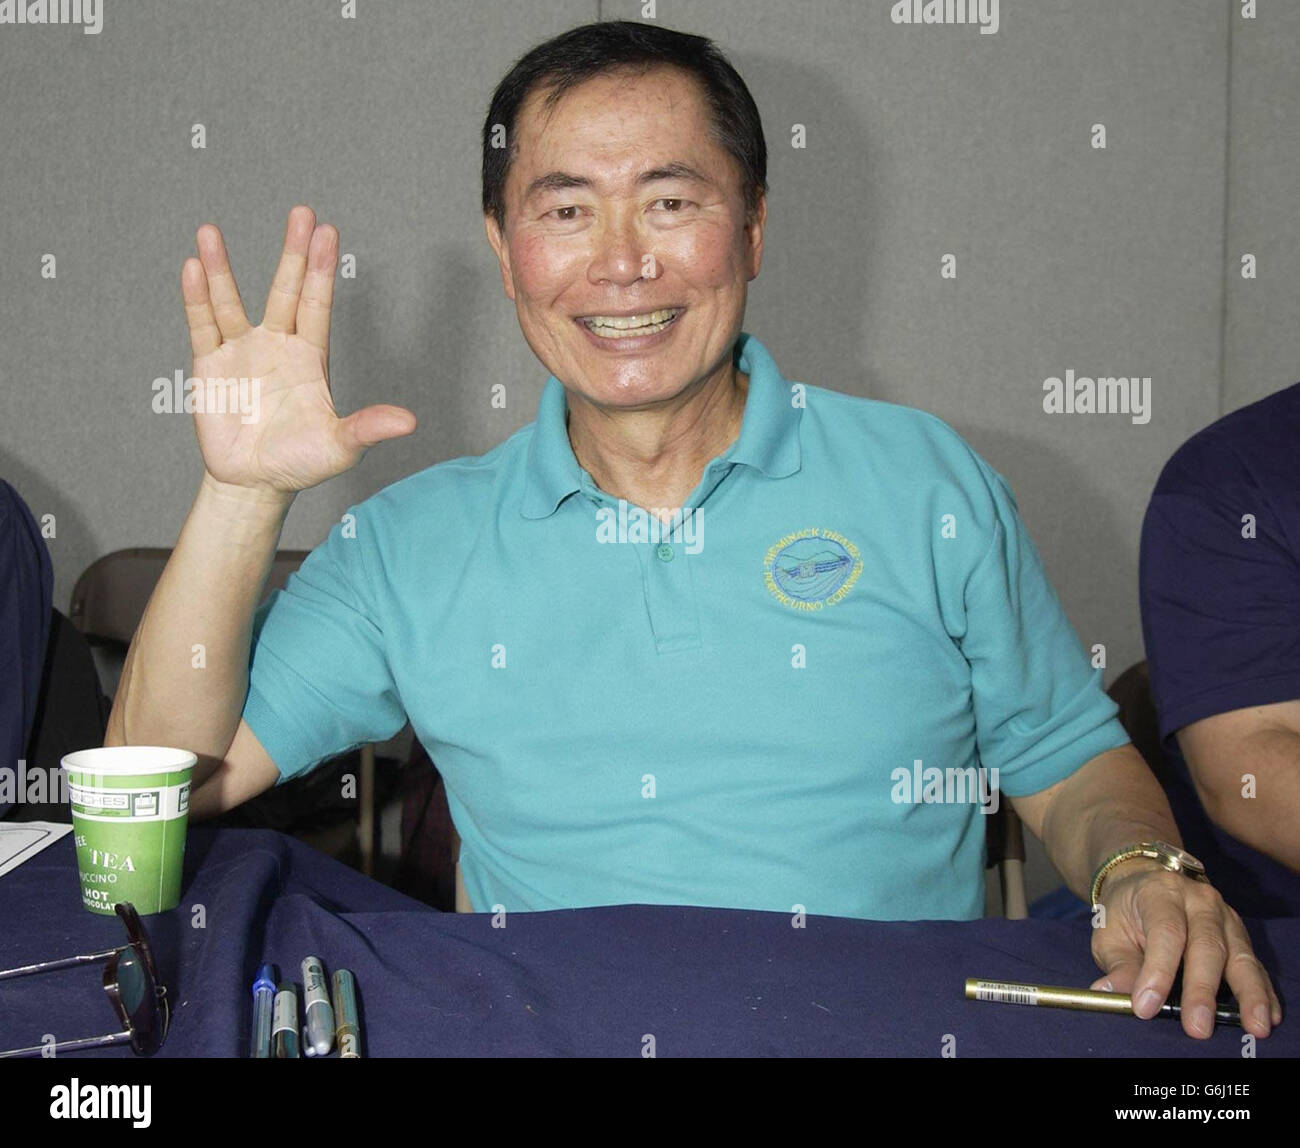 Actor George Takei, who played Sulu in the Star Trek television series and films, during a signing session at the Collectormania 4 film festival and collector's fair held at the Centre:MK, Milton Keynes. Stock Photo